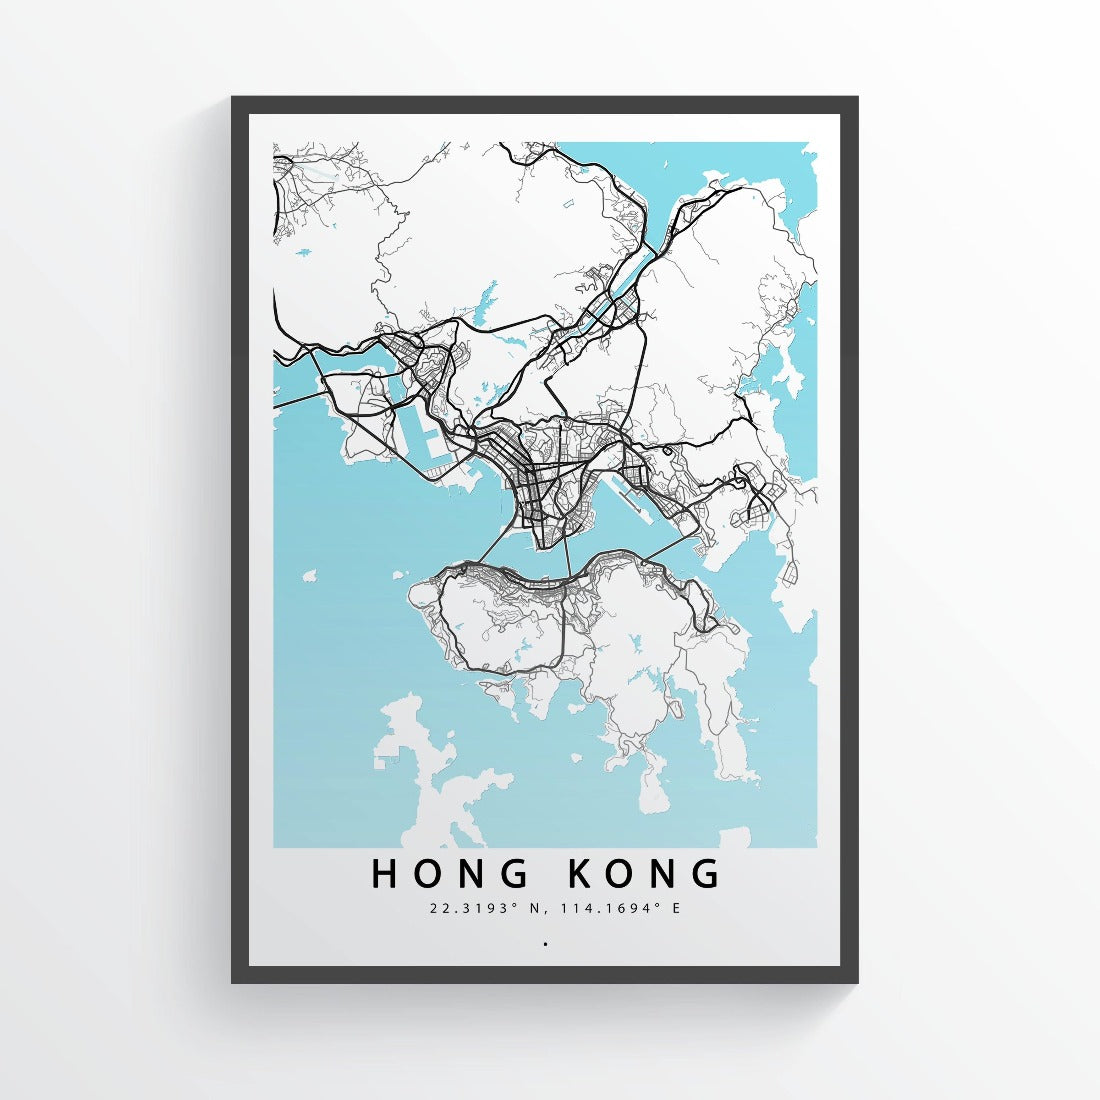 Find your way through the bustling cityscape of Hong Kong with this vibrant city map print. Printed on high quality paper, this map is perfect for framing and makes for a great addition to any home or office. With clear and easy to read labeling, you'll be able to quickly and easily navigate your way around this vibrant city. Plus, this map makes for a great conversation starter and is sure to impress any guests who see it. So whether you're a Hong Kong native or a city lover, this map is a must-have.